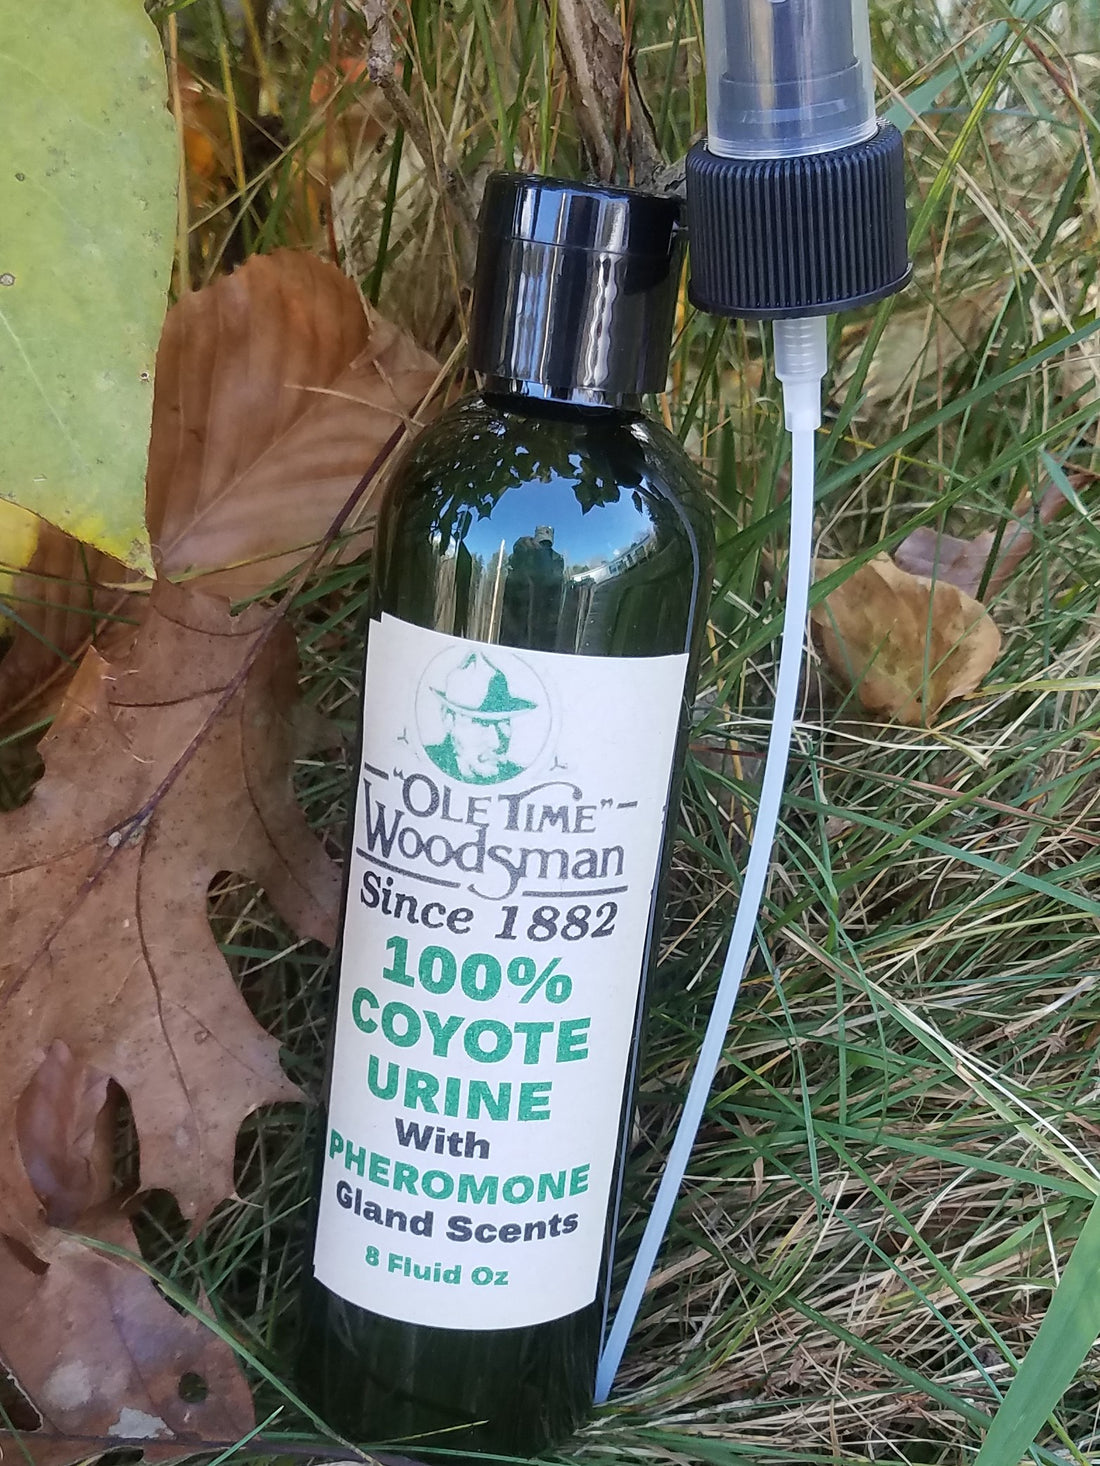 Does coyote urine really work?